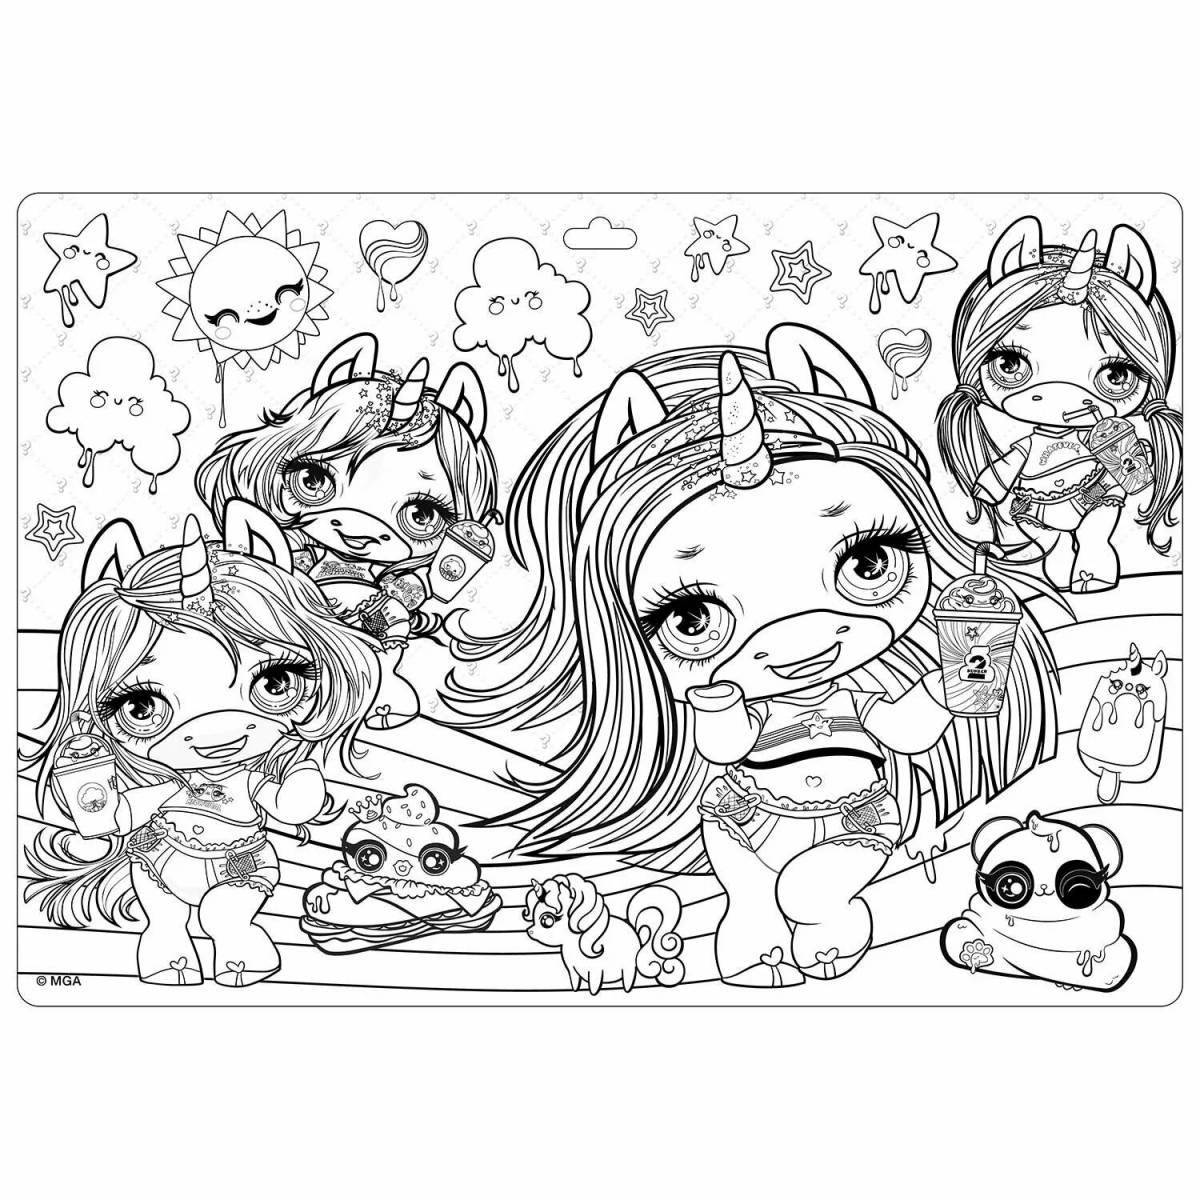 Live puppy coloring page